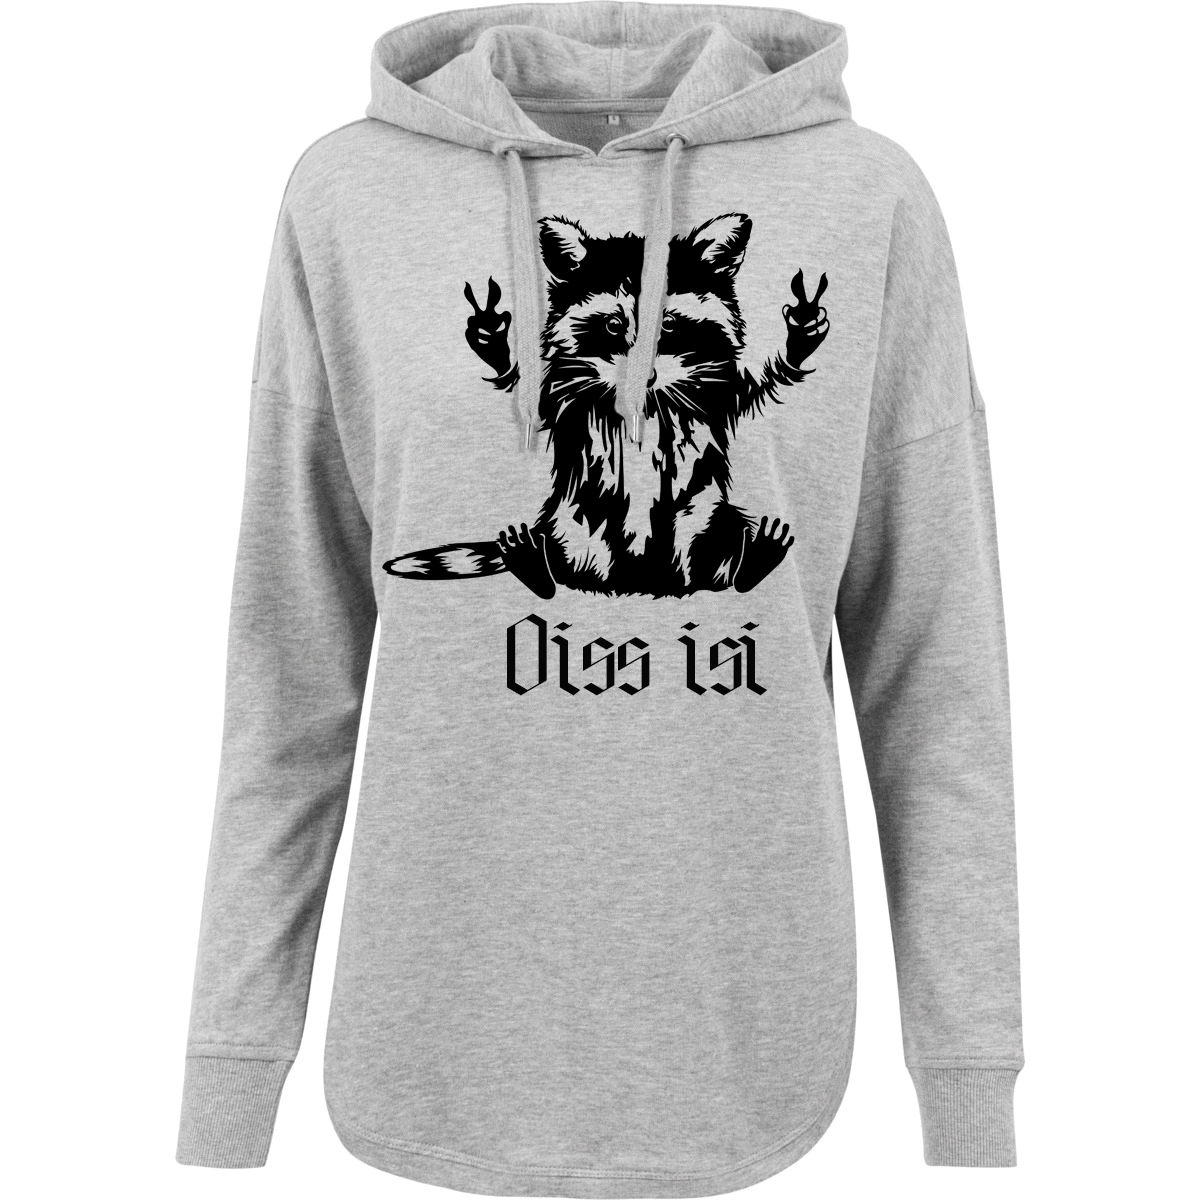 Hoodie Waschbär Fred Oiss isi Oversized 